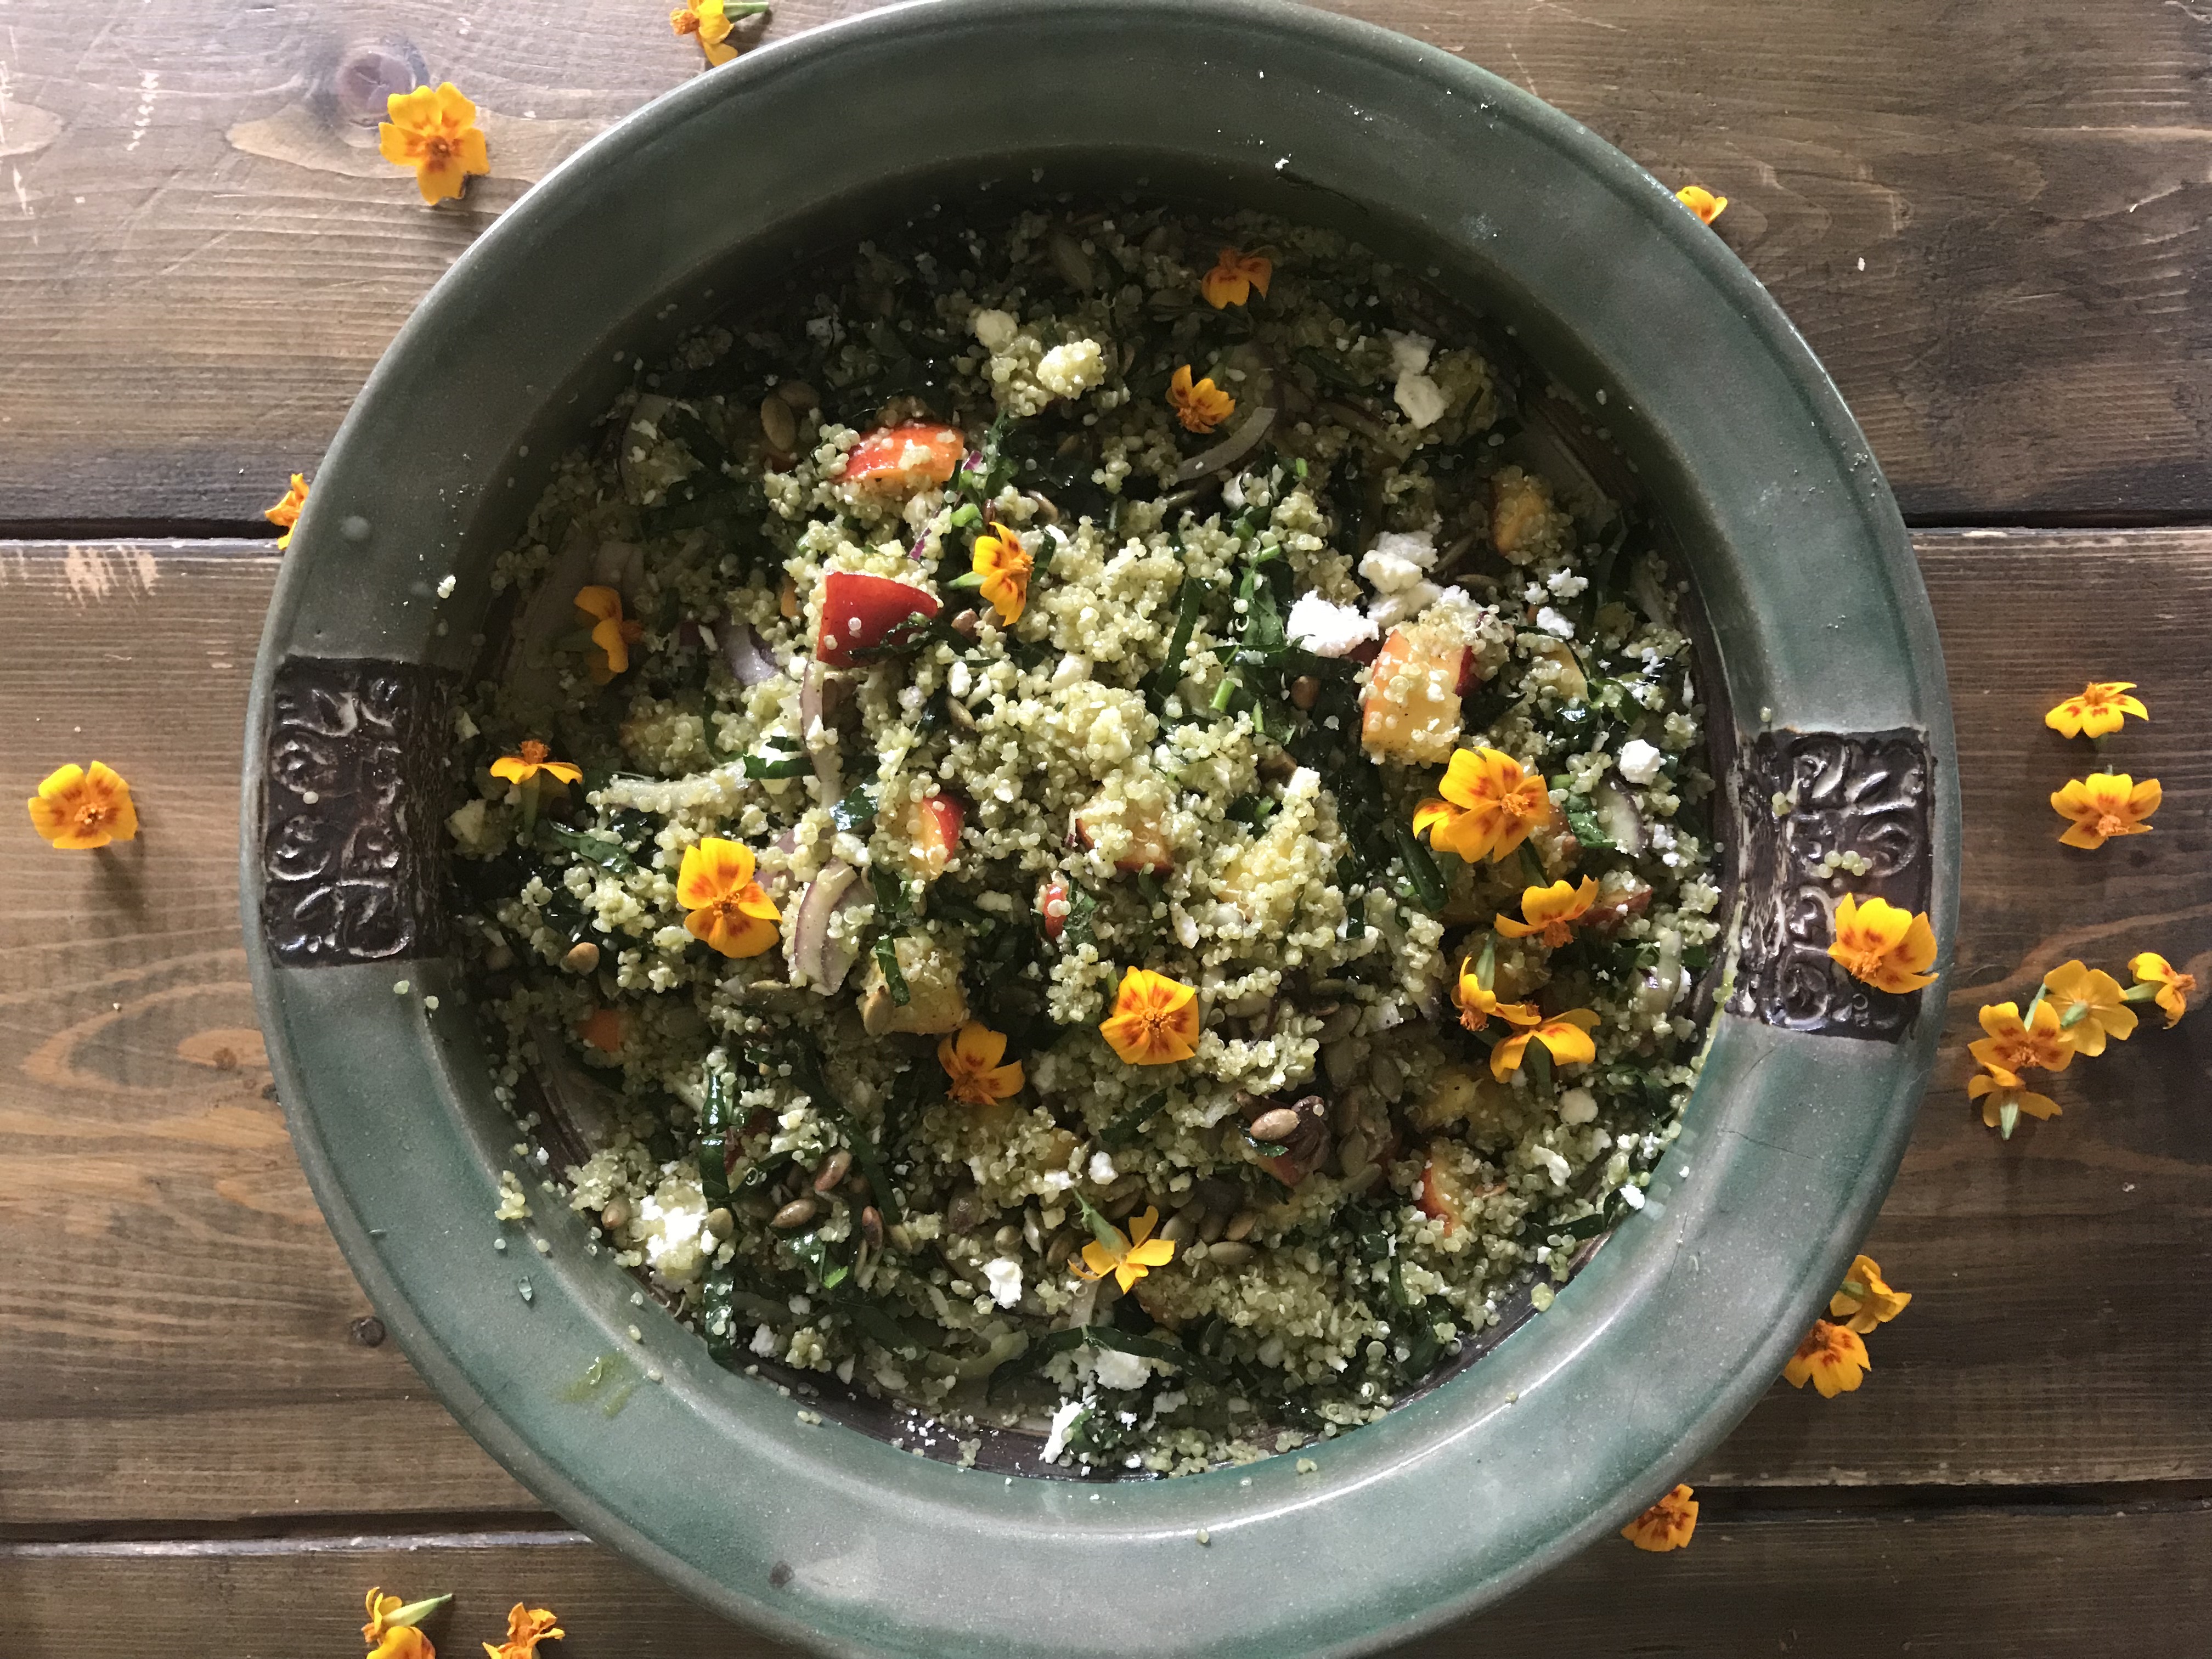 End of Summer Quinoa Salad with Nectarines, Pumpkin seeds, Kale ribbons in a Basil Vinaigrette